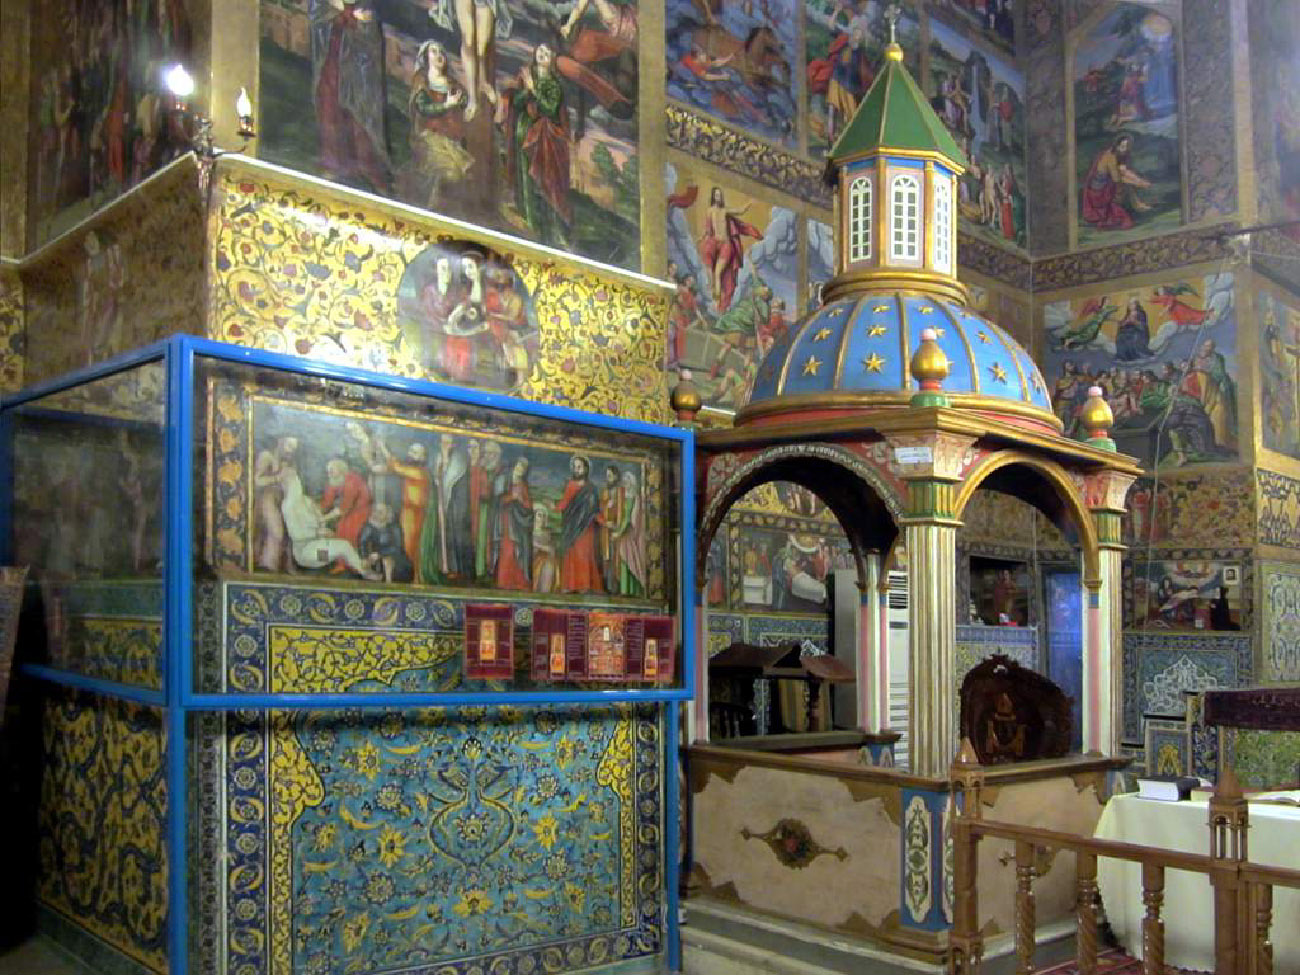 A photograph of an interior of an elaborately decorated room is shown. A small gazebo is located in the right portion of the photograph with a blue starry domed top and a steeple with white grates and a green roof. Part of an altar is shown to the left. The walls of the rest of the room are filled with paintings of people in long robes, women and children, as well as other religious scenes. Around the paintings the walls are decorated with flowery tiles.